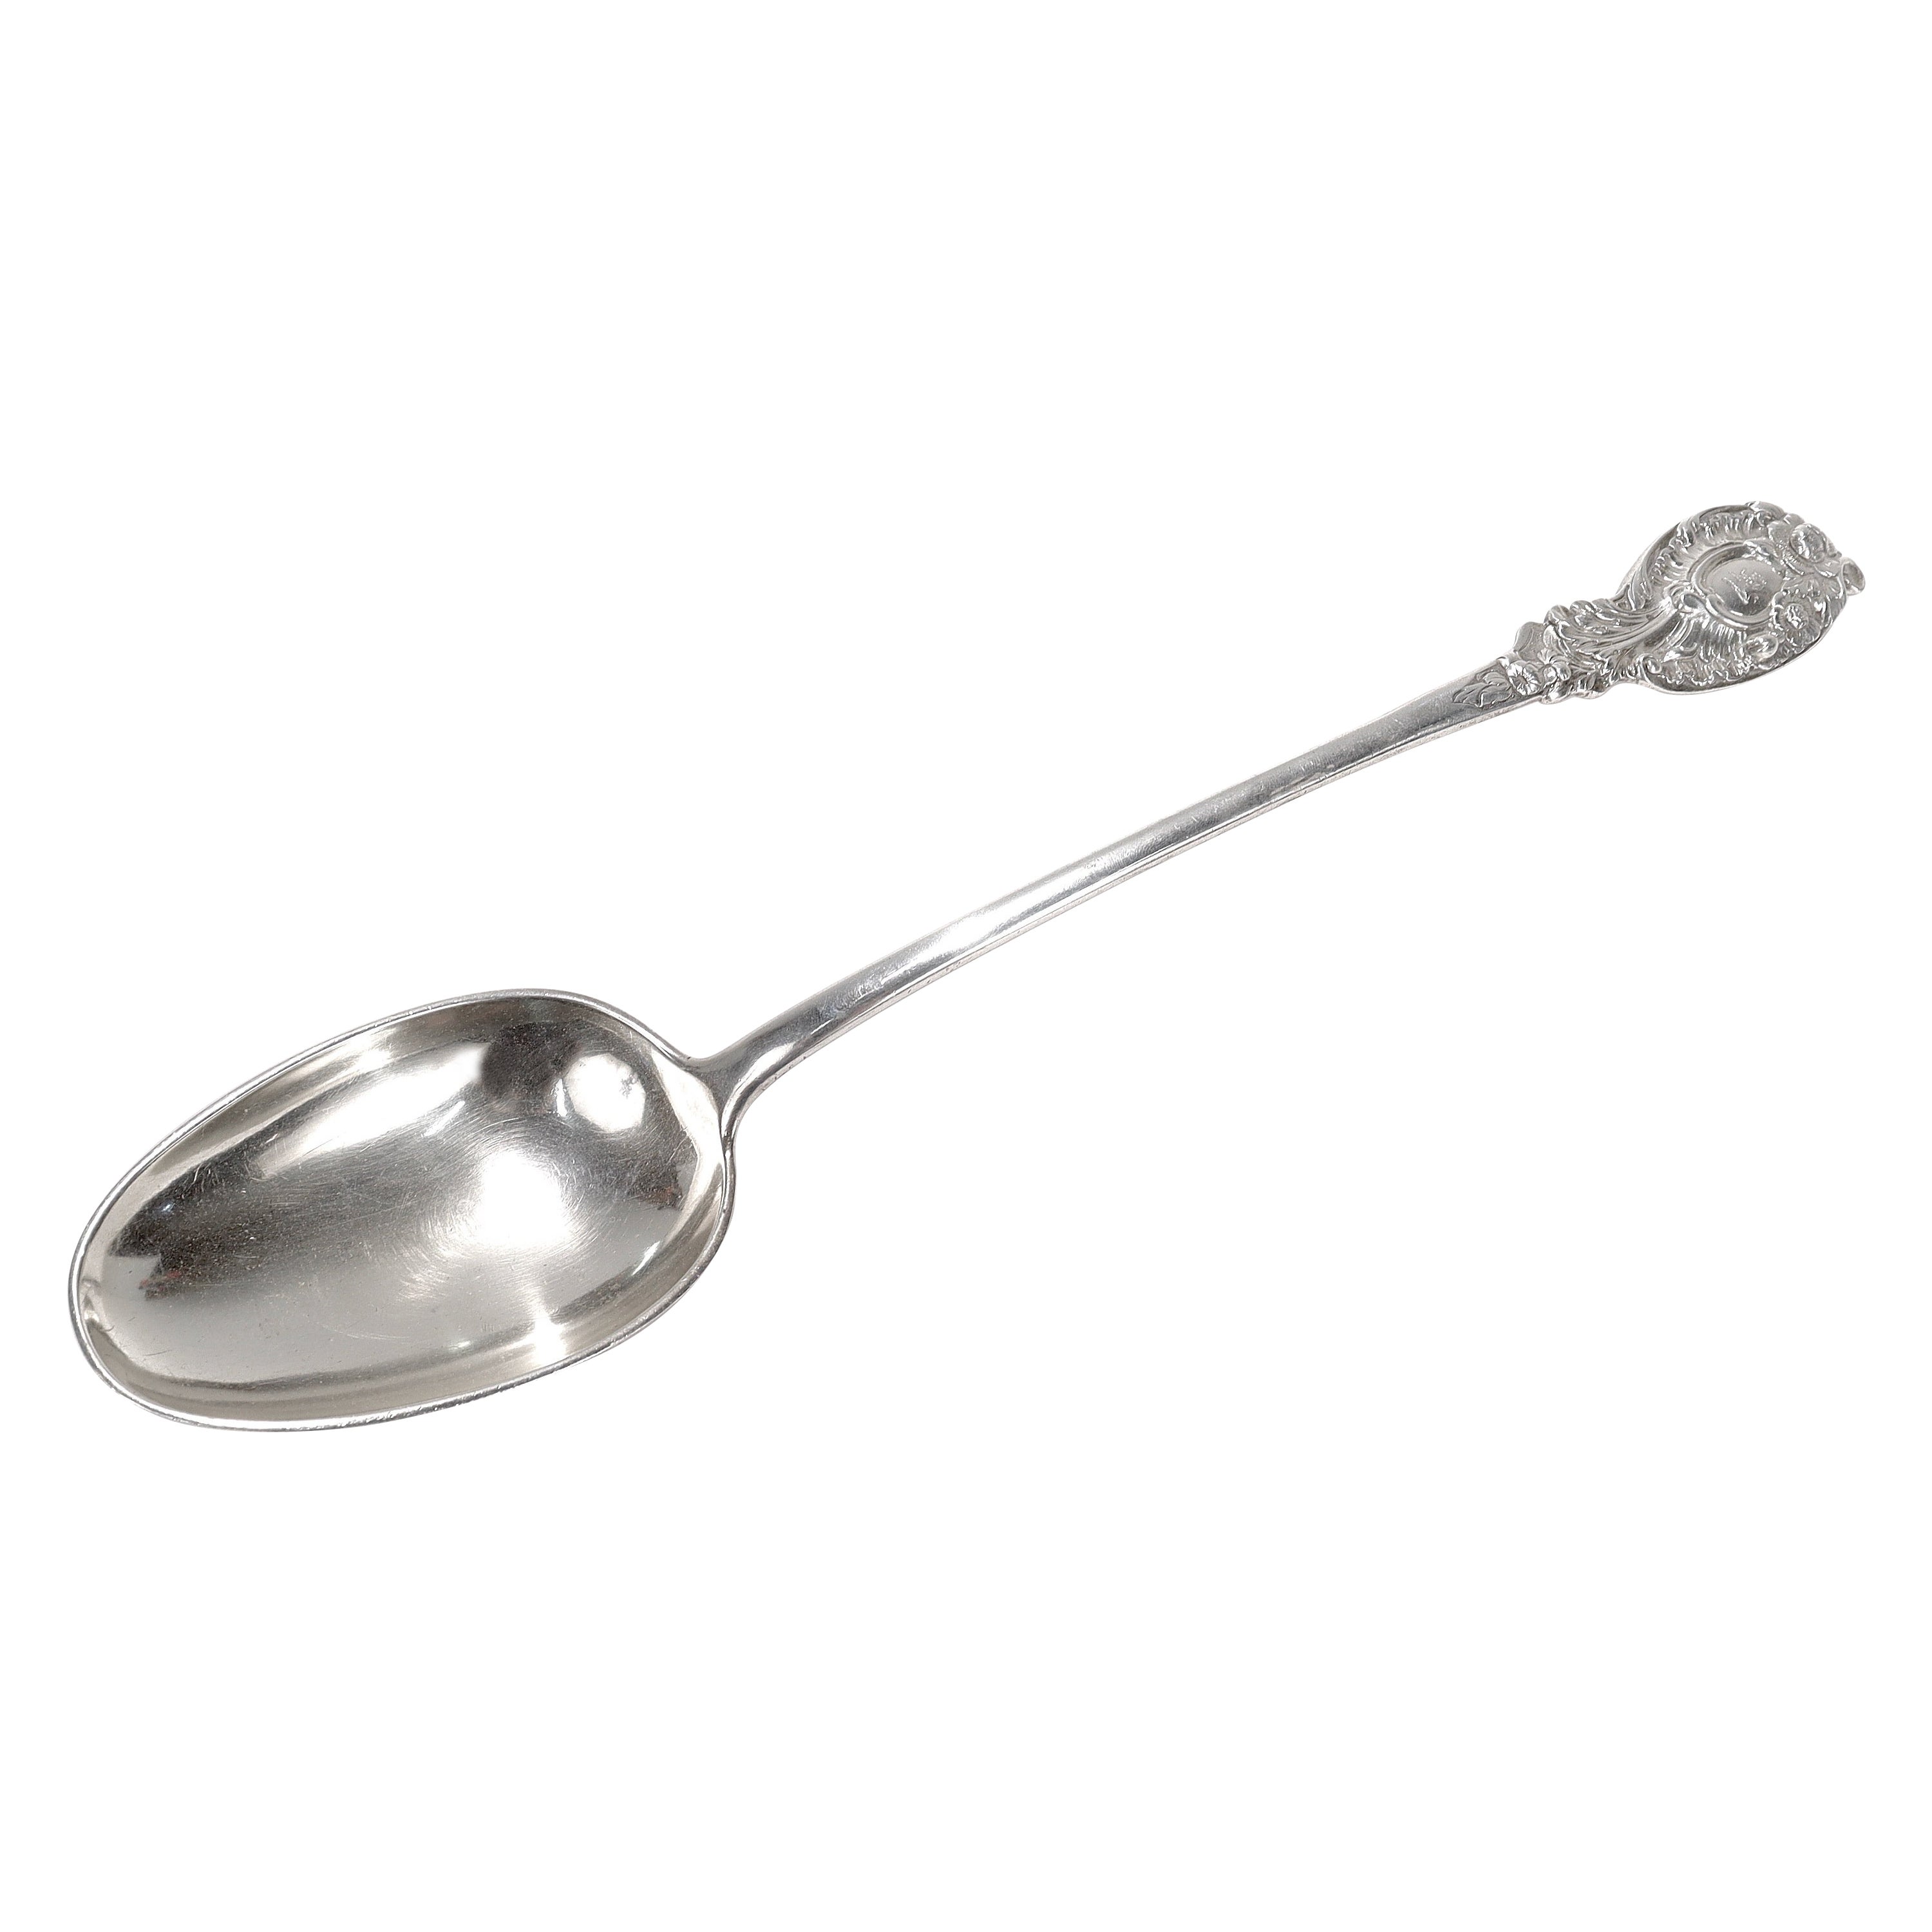 Large George III Robert Garrard I English Sterling Silver Crested Stuffing Spoon